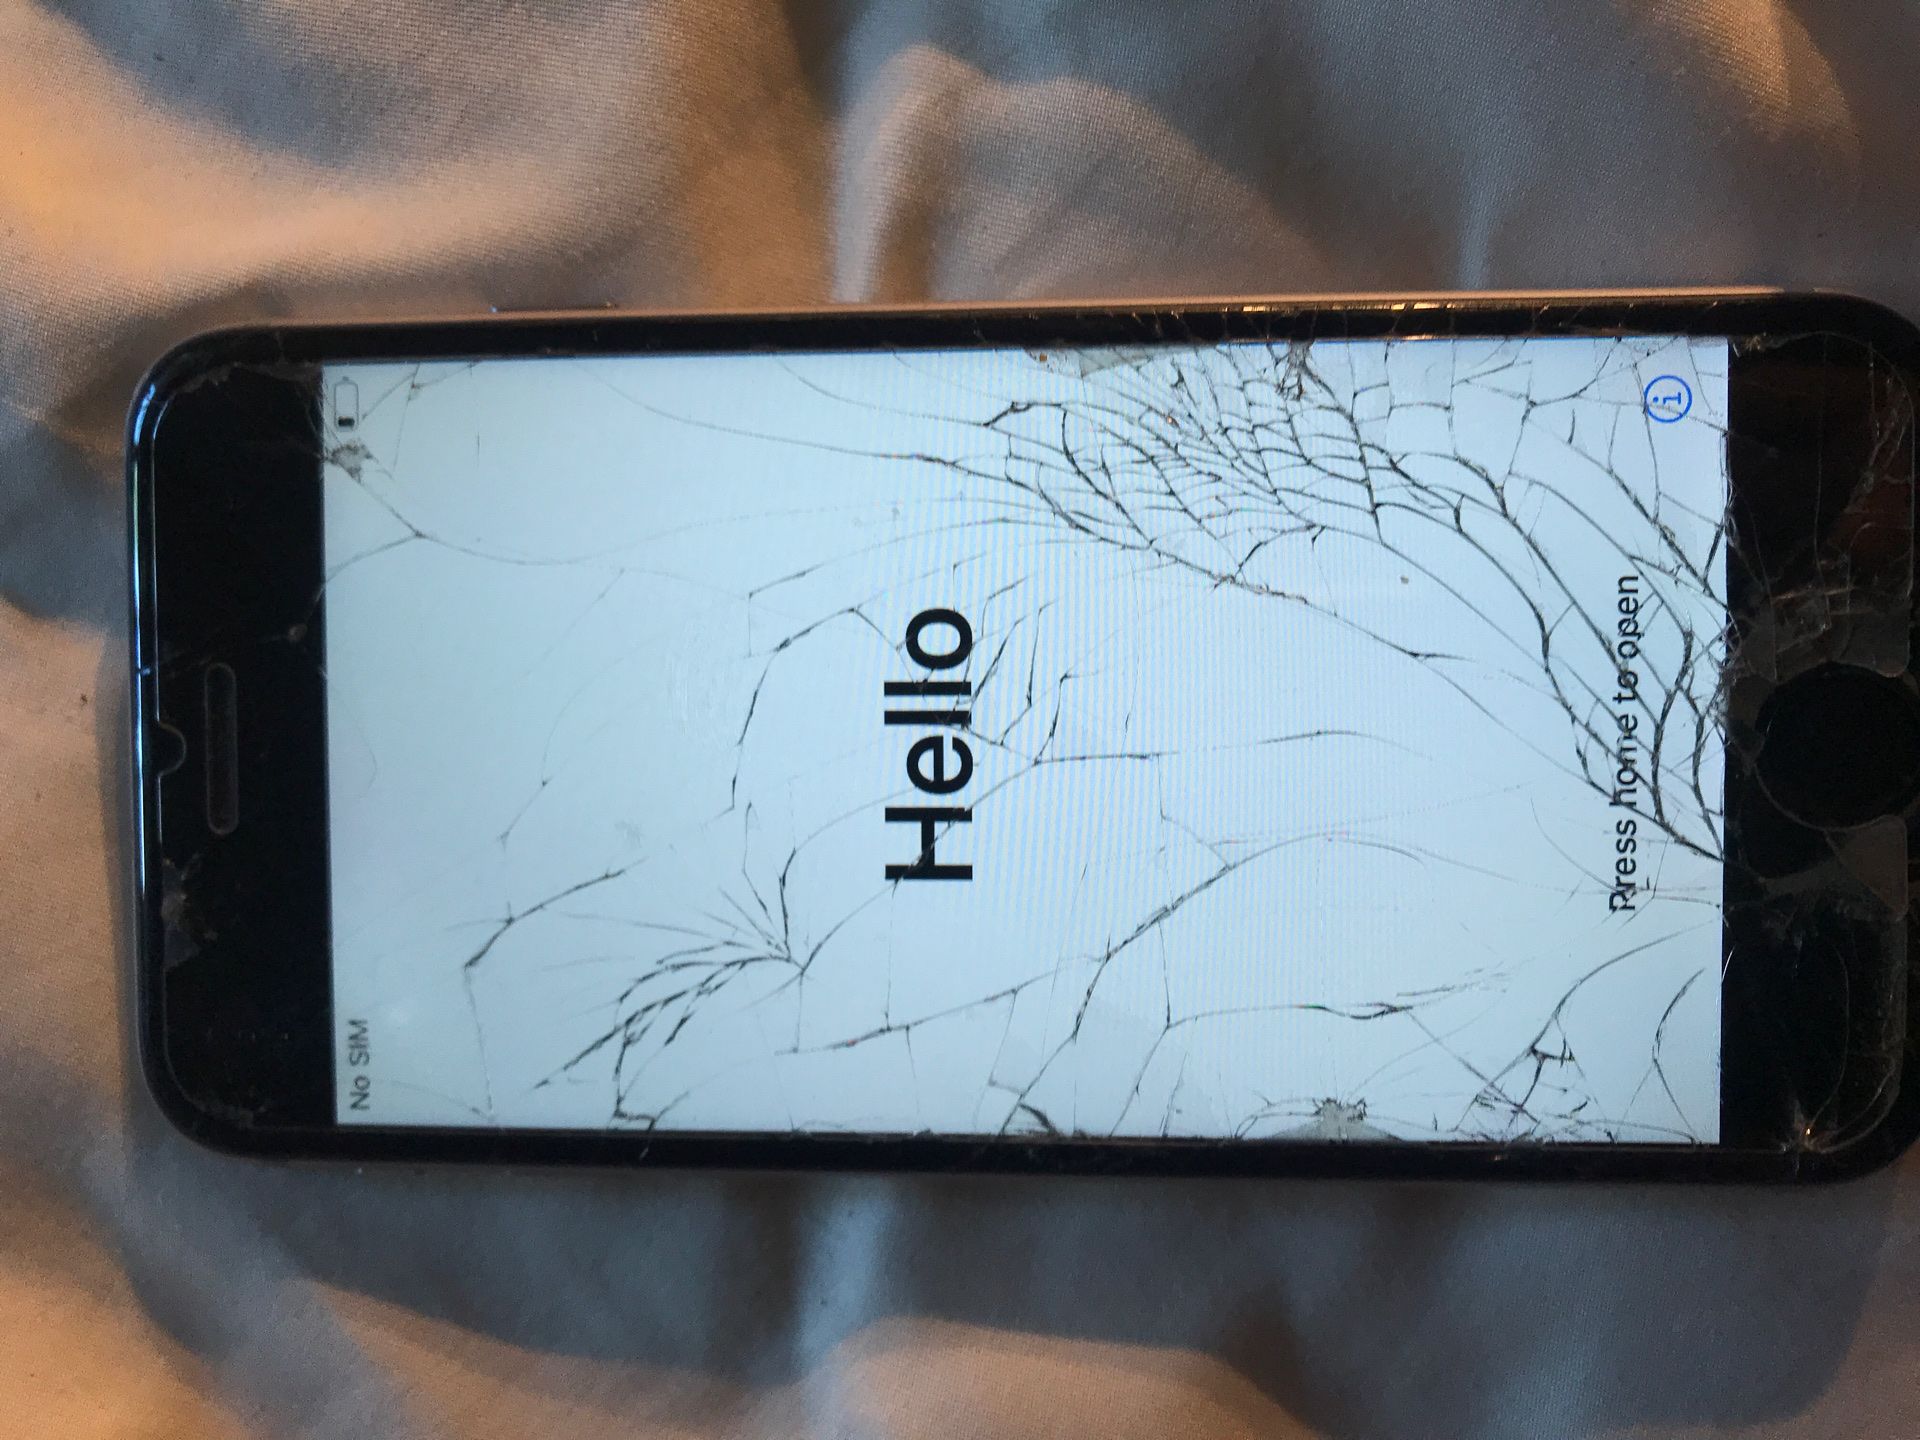 Unlocked iPhone 6s 32 gig has broken screen but works perfectly fine